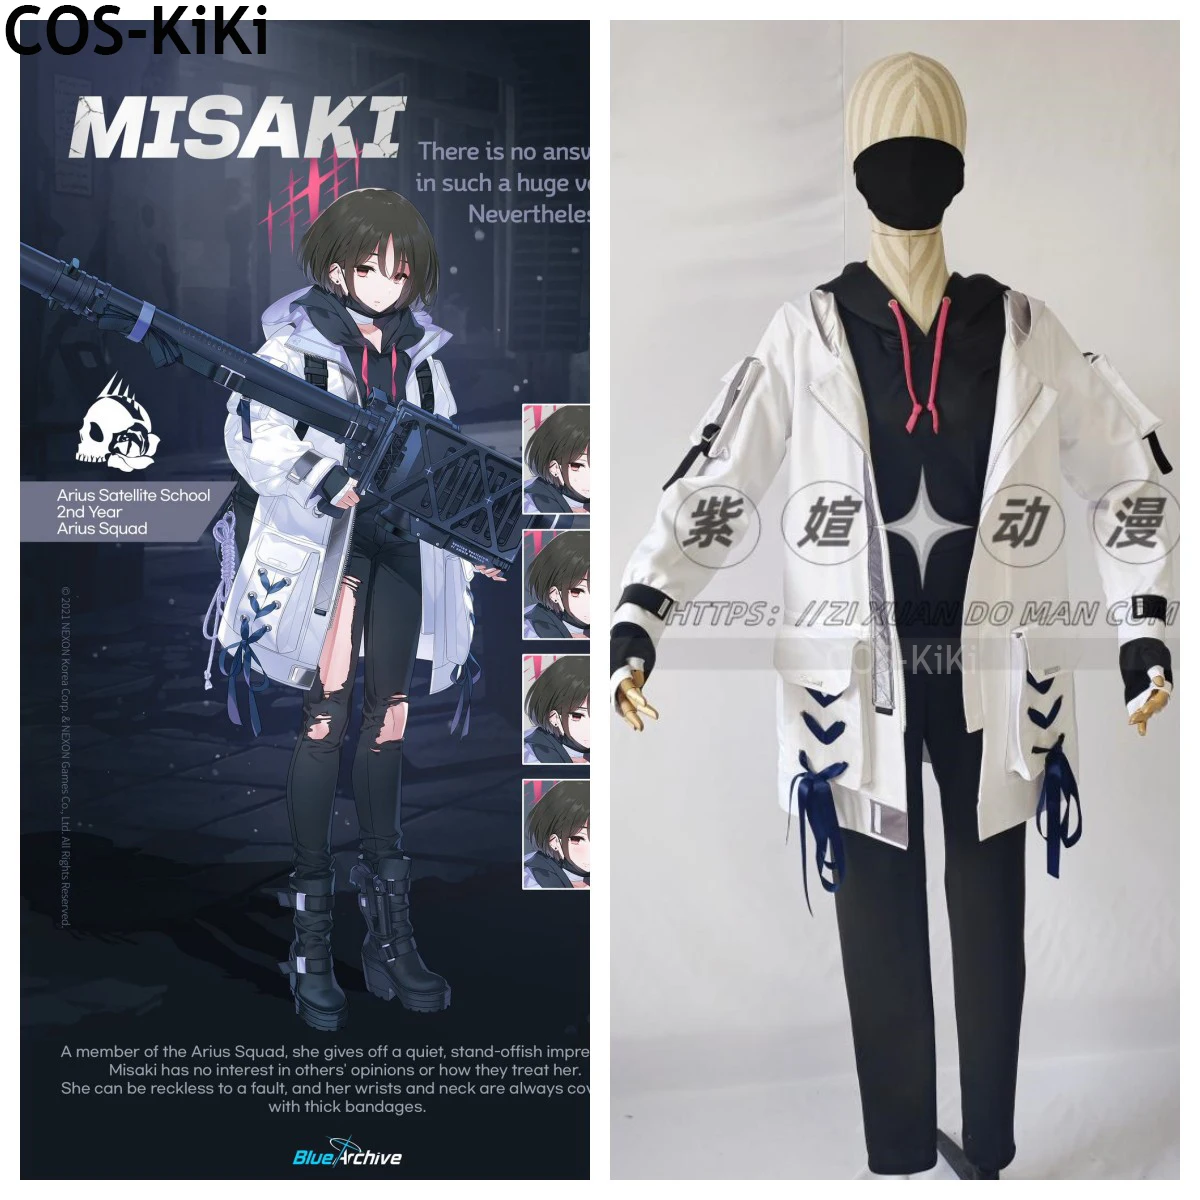 

COS-KiKi Blue Archive Misaki Game Suit Gothic Uniform Cosplay Costume Halloween Carnival Party Role Play Outfit Women Any Size